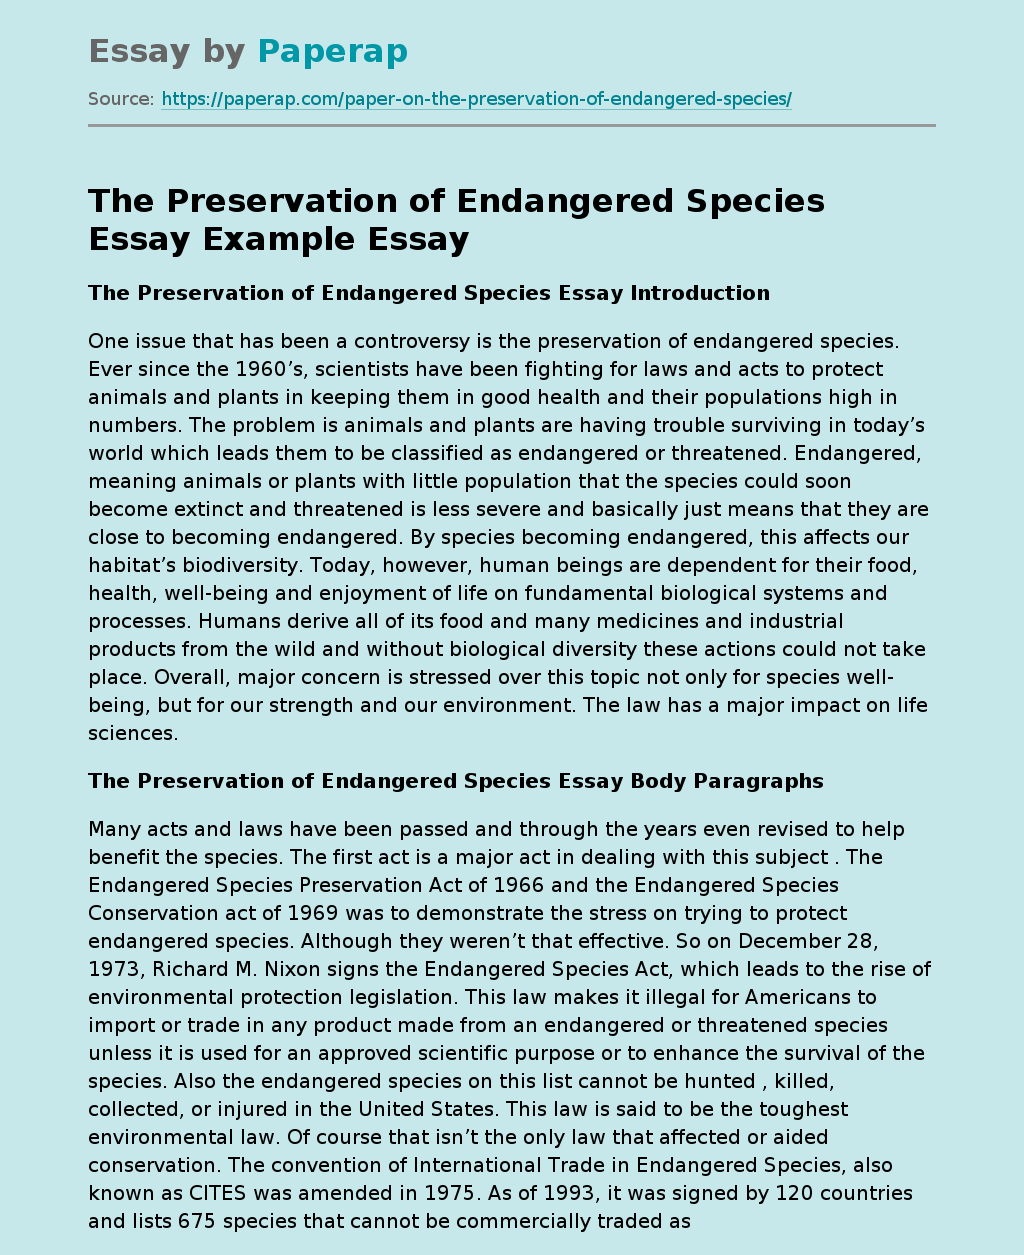 The Preservation of Endangered Species Essay Example